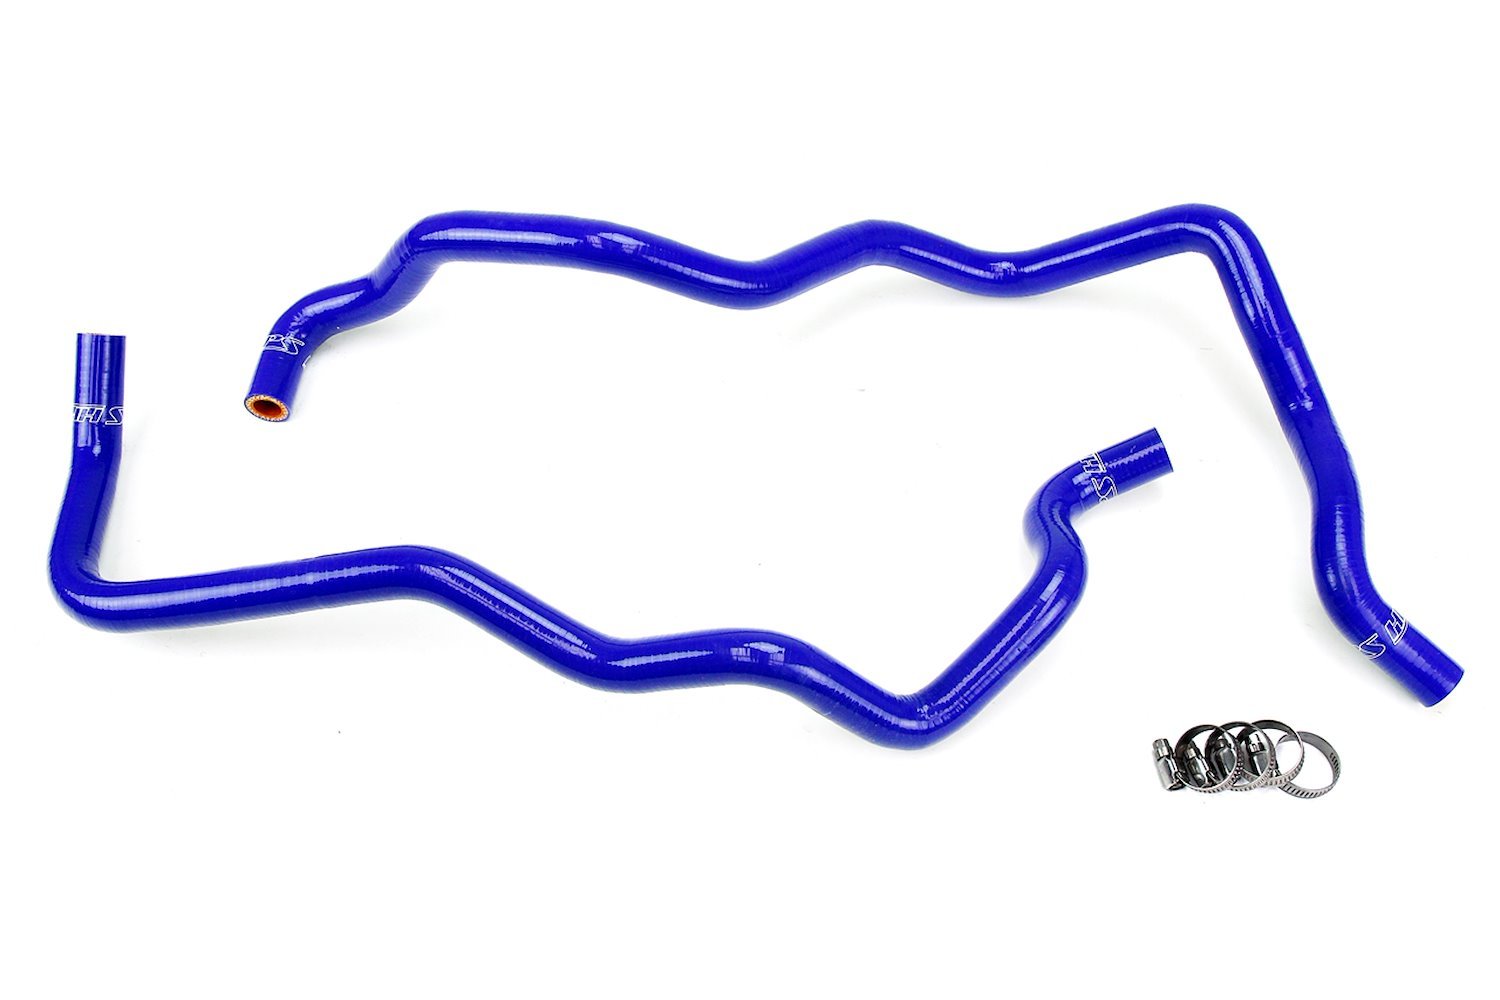 57-1220H-BLUE Heater Hose Kit, High-Temp 3-Ply Reinforced Silicone, Replace OEM Rubber Heater Coolant Hoses